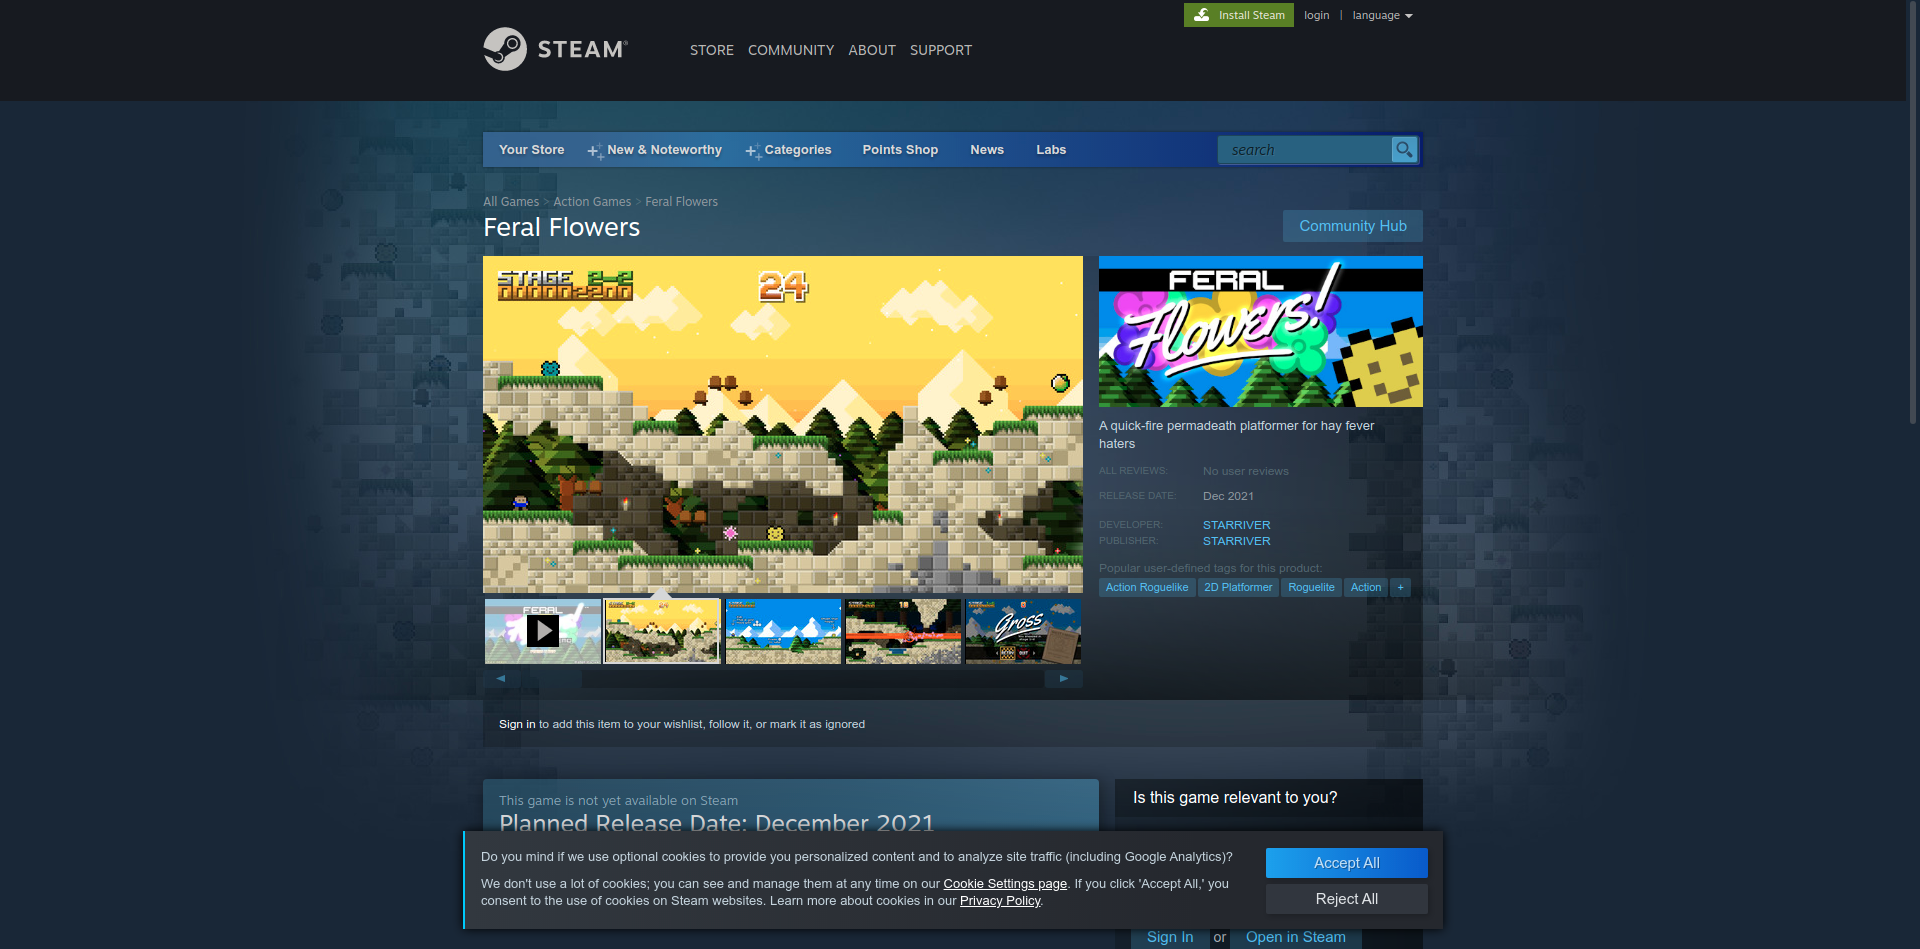 Feral Flowers on Steam